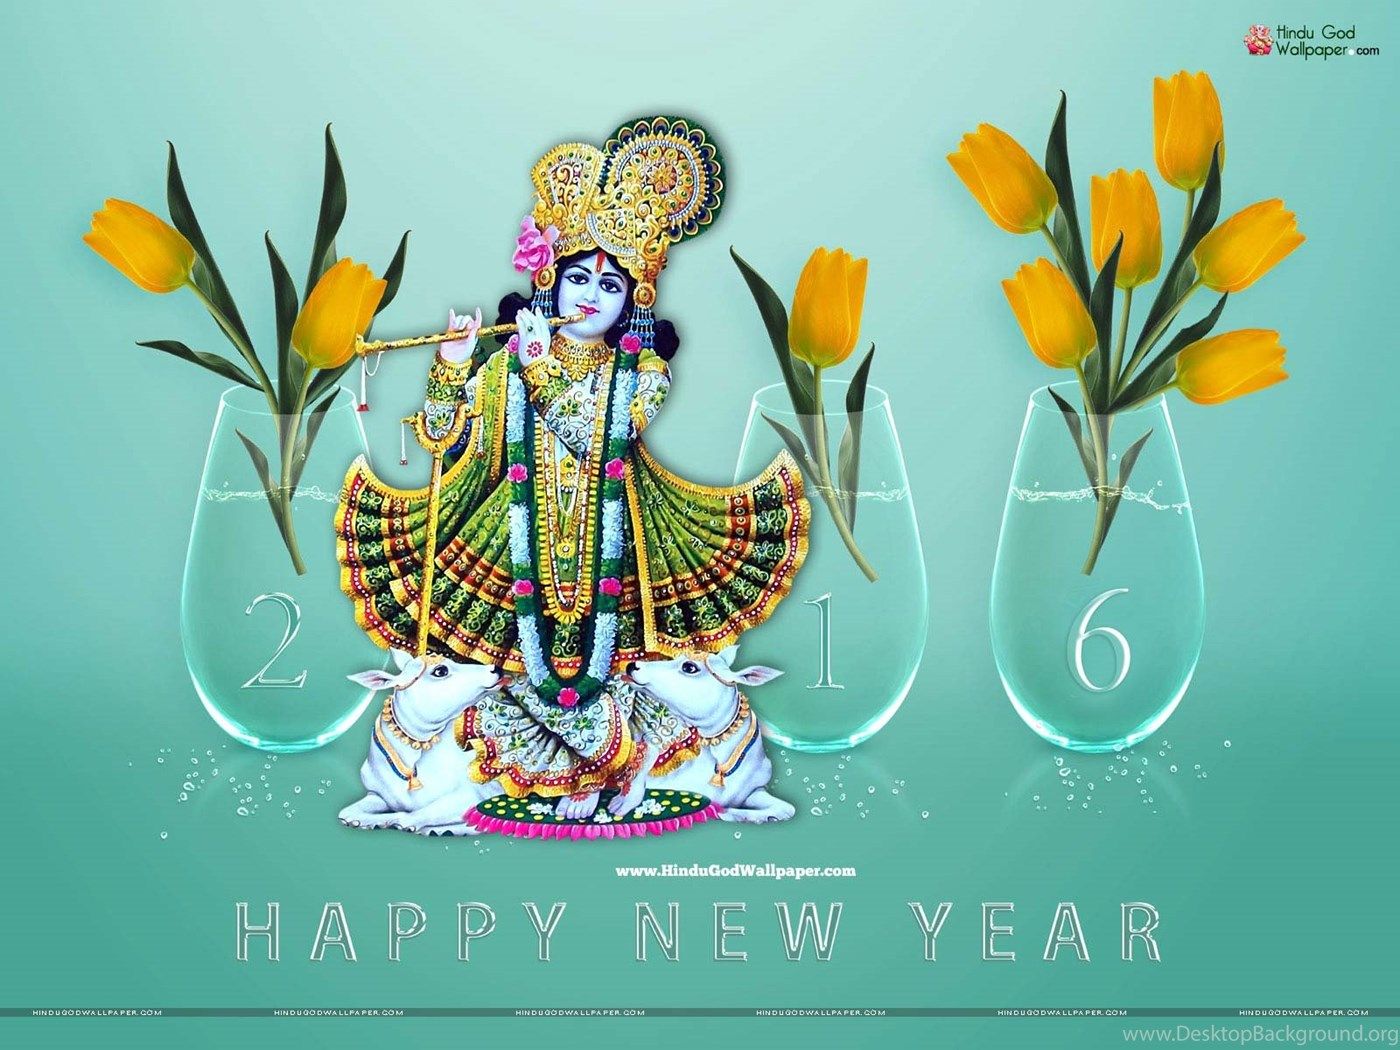 Happy New Year 2016 God Image Wallpaper Picture { HD } Desktop Background